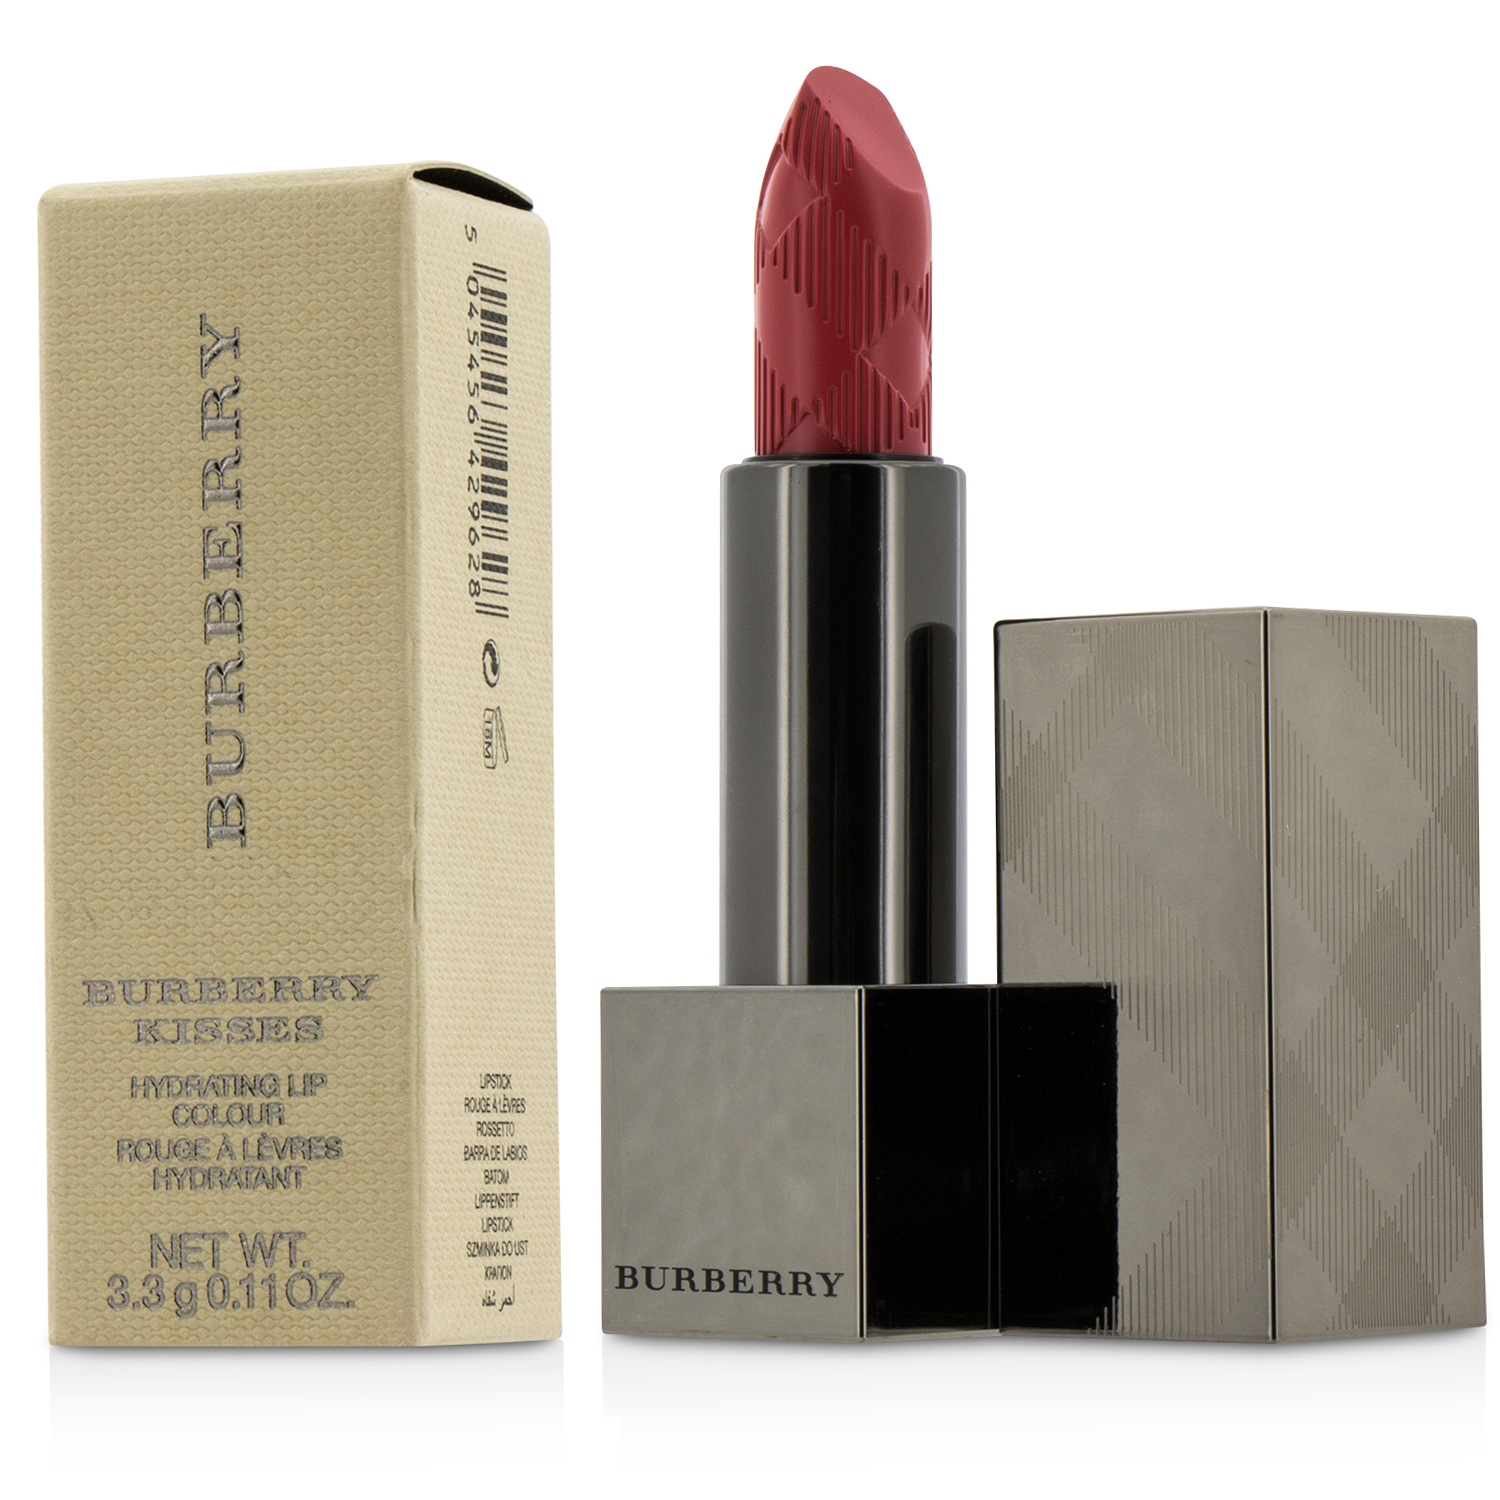 Burberry Kisses Hydrating Lip Colour - # No. 41 Pomegranate Pink Burberry Image